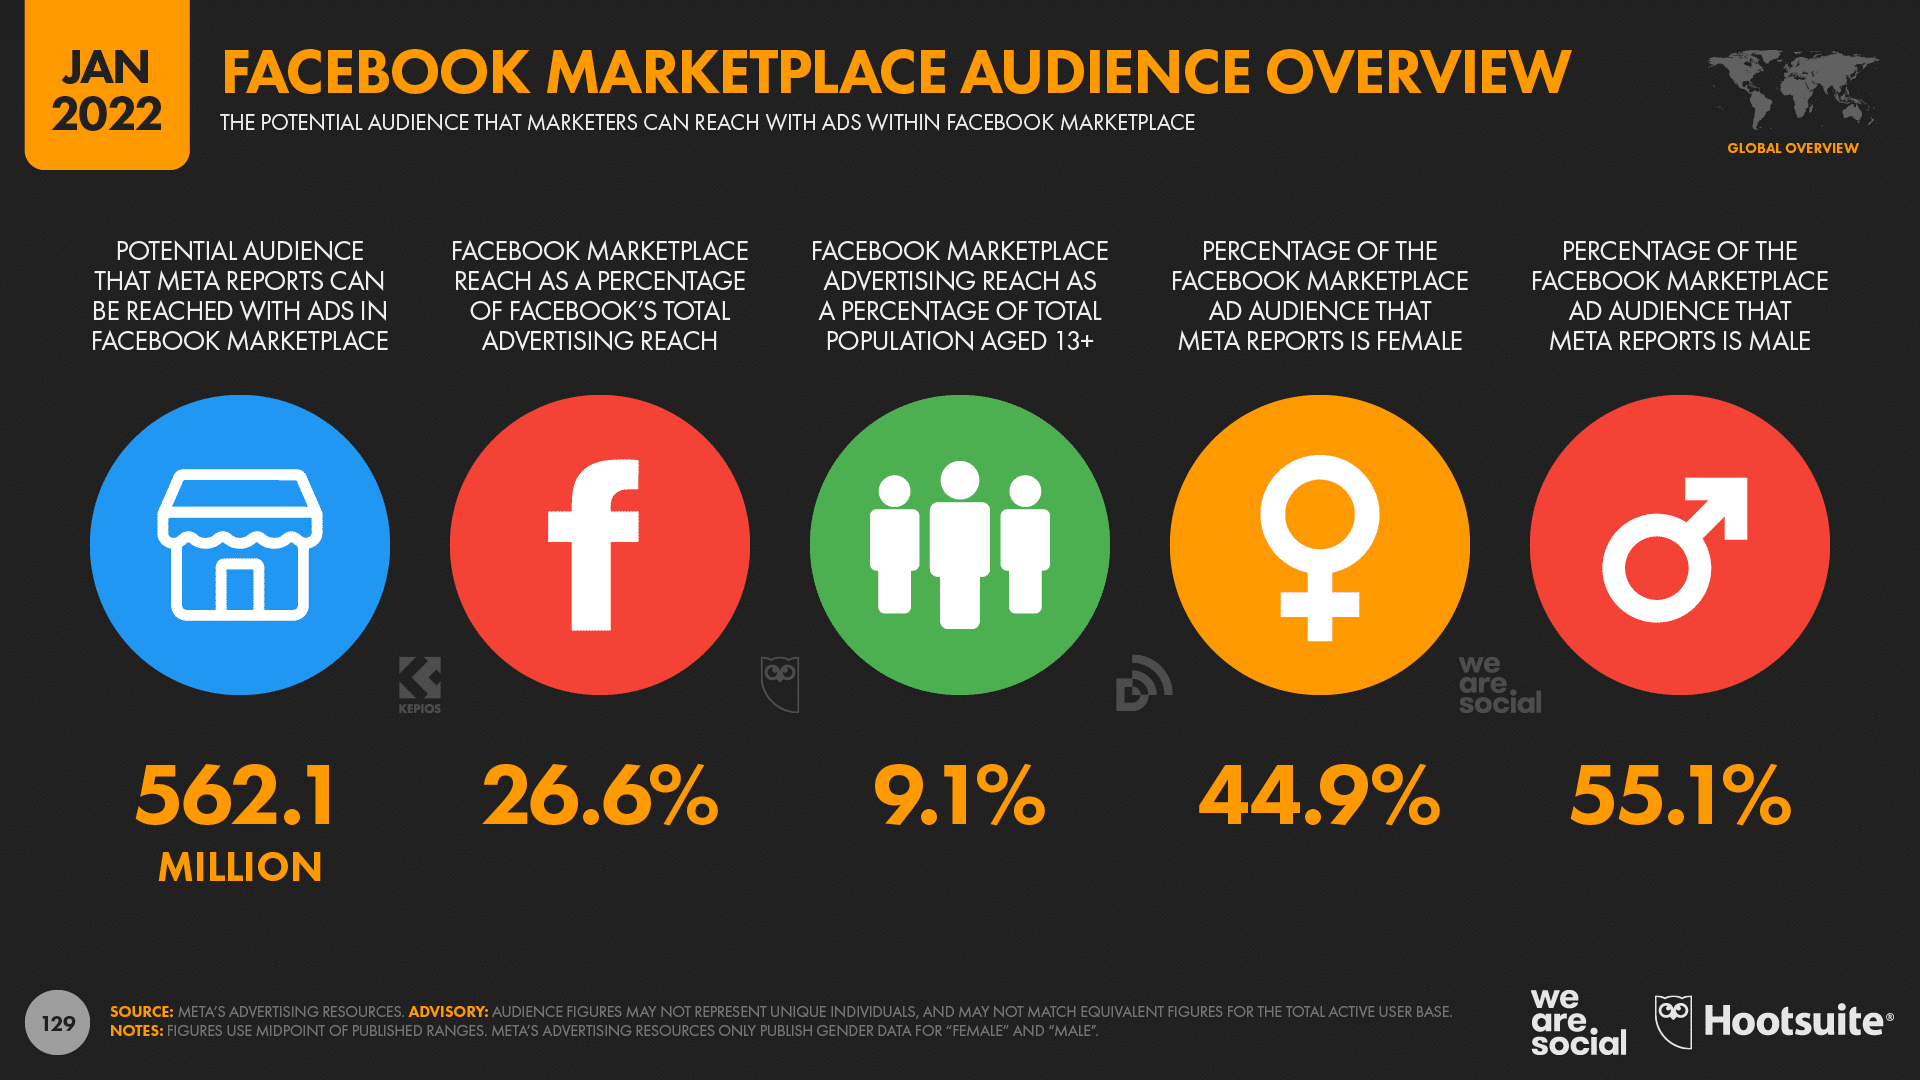 Facebook marketplace audience overview